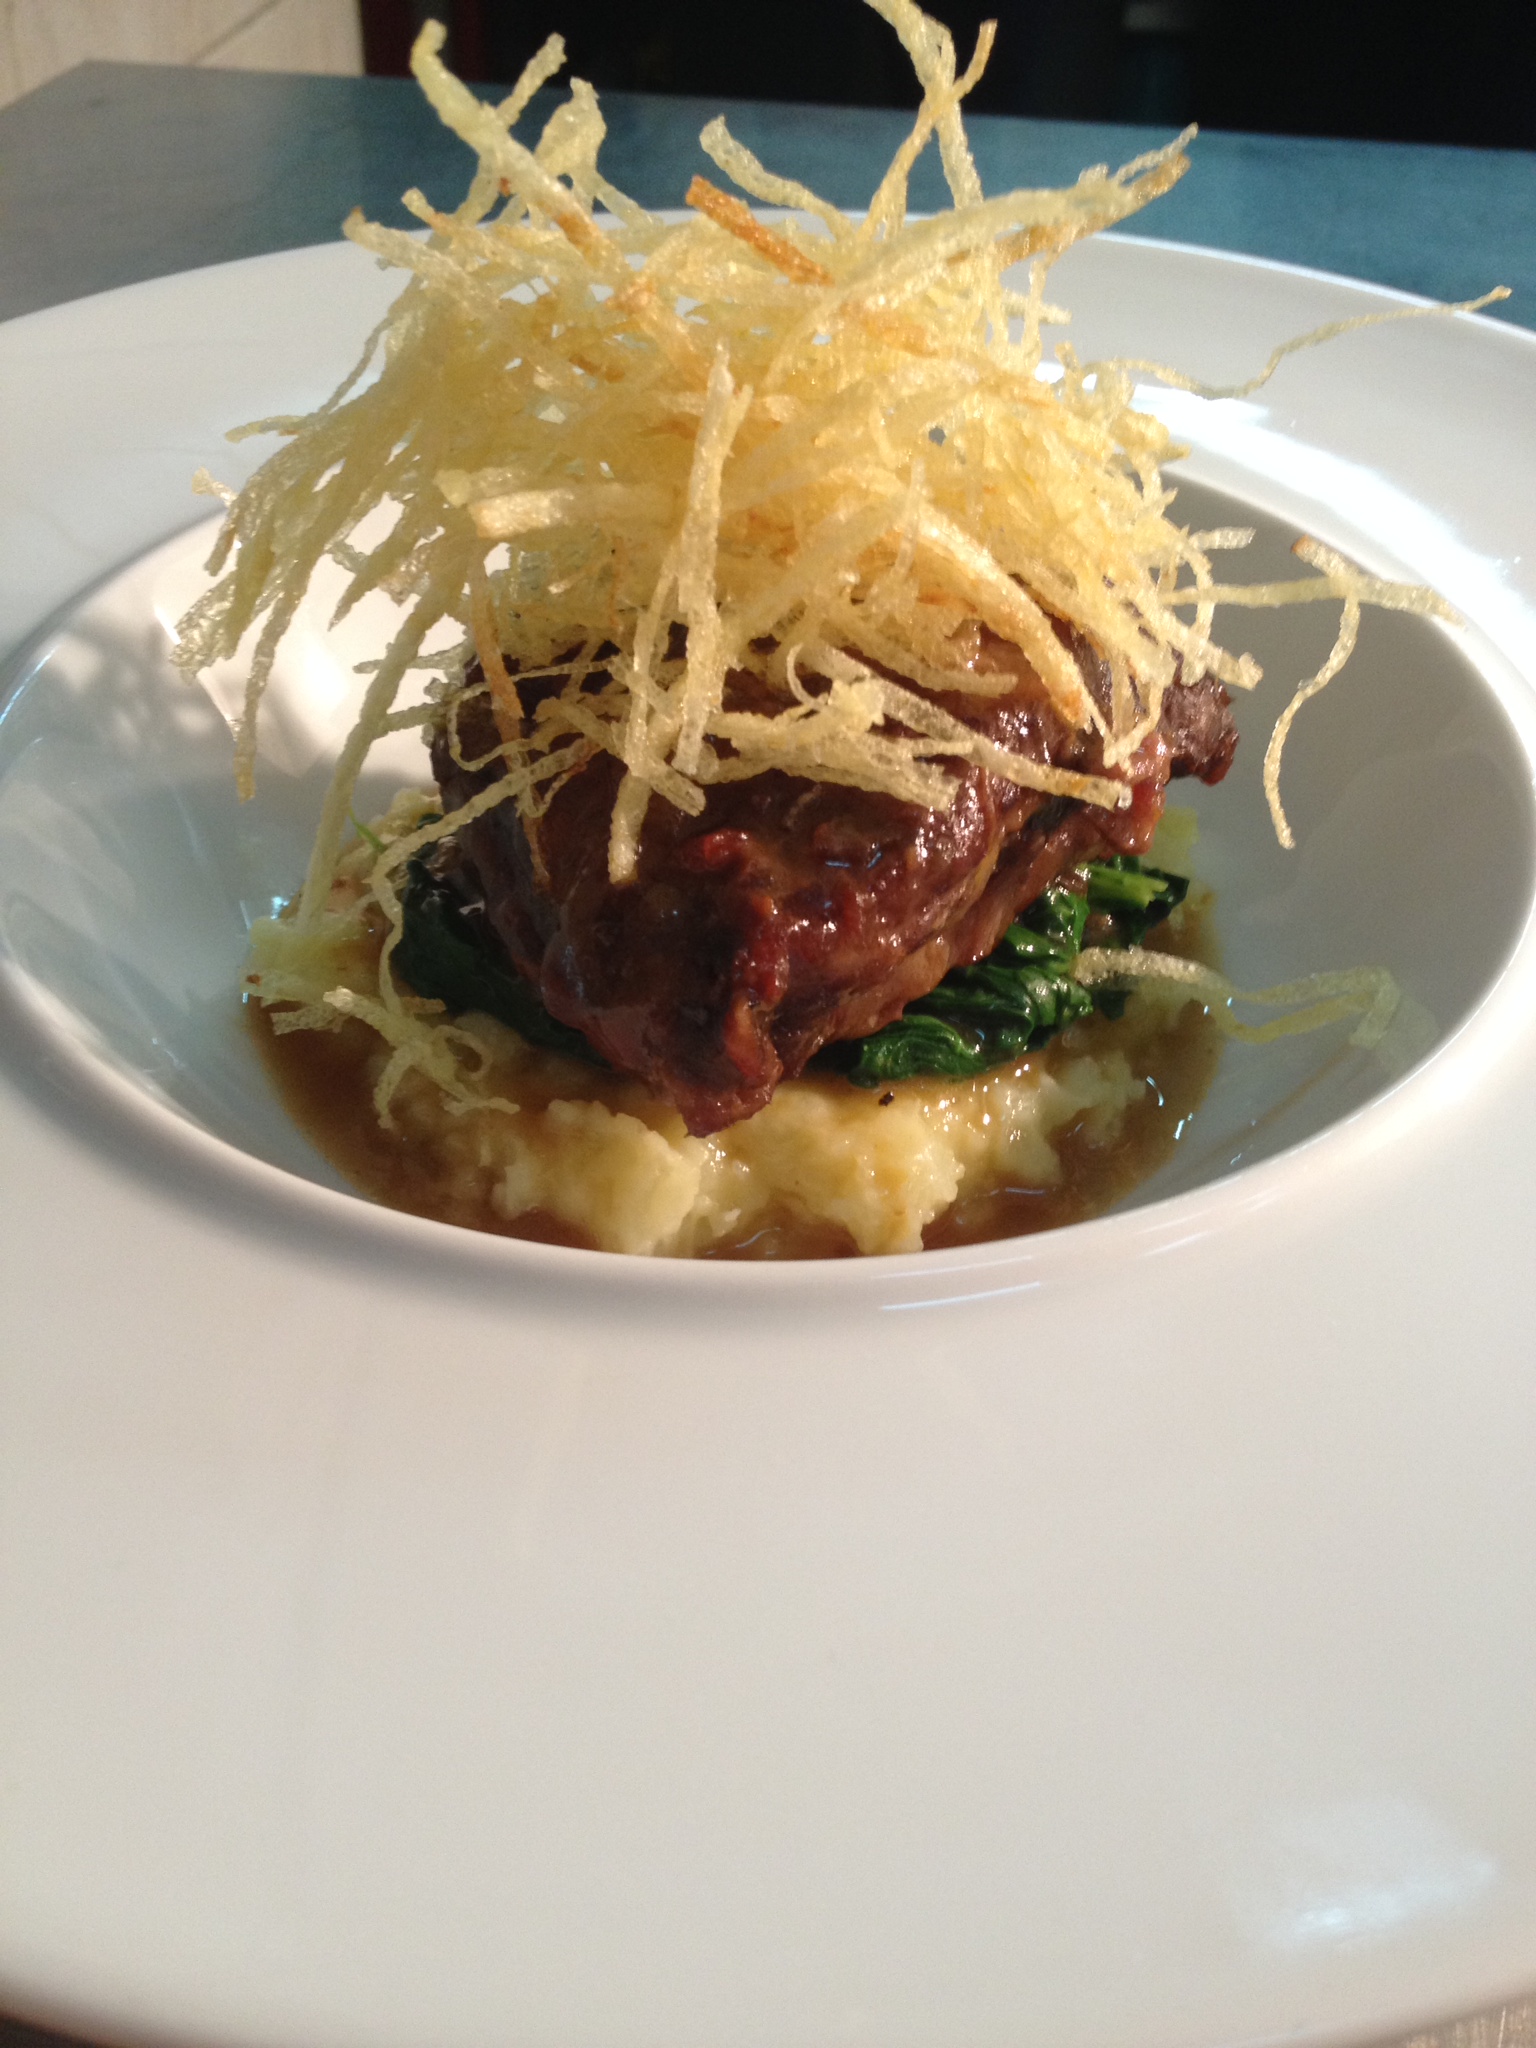 Braised beef cheeks with red wine, cardamon and lemongrass